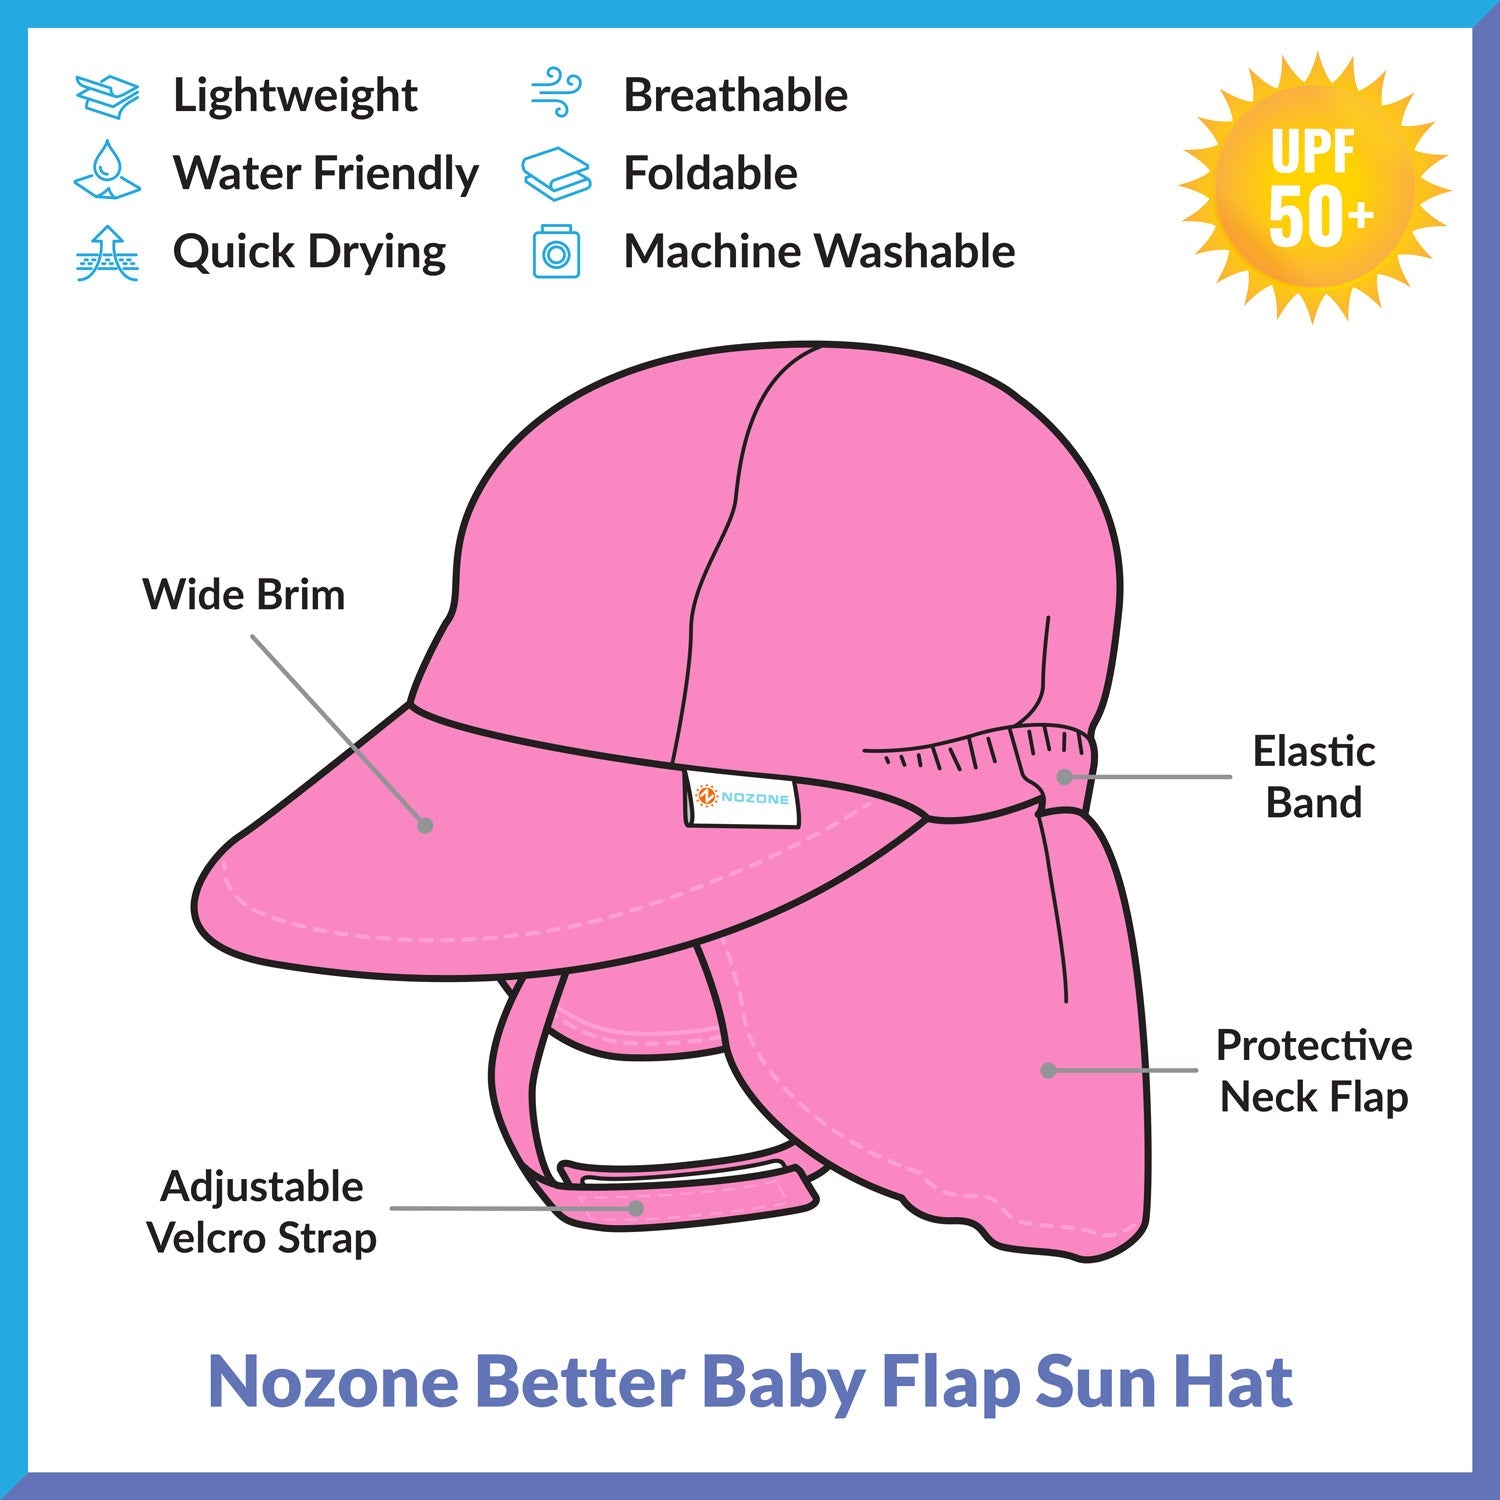 The Better Baby Flap Sun Hat